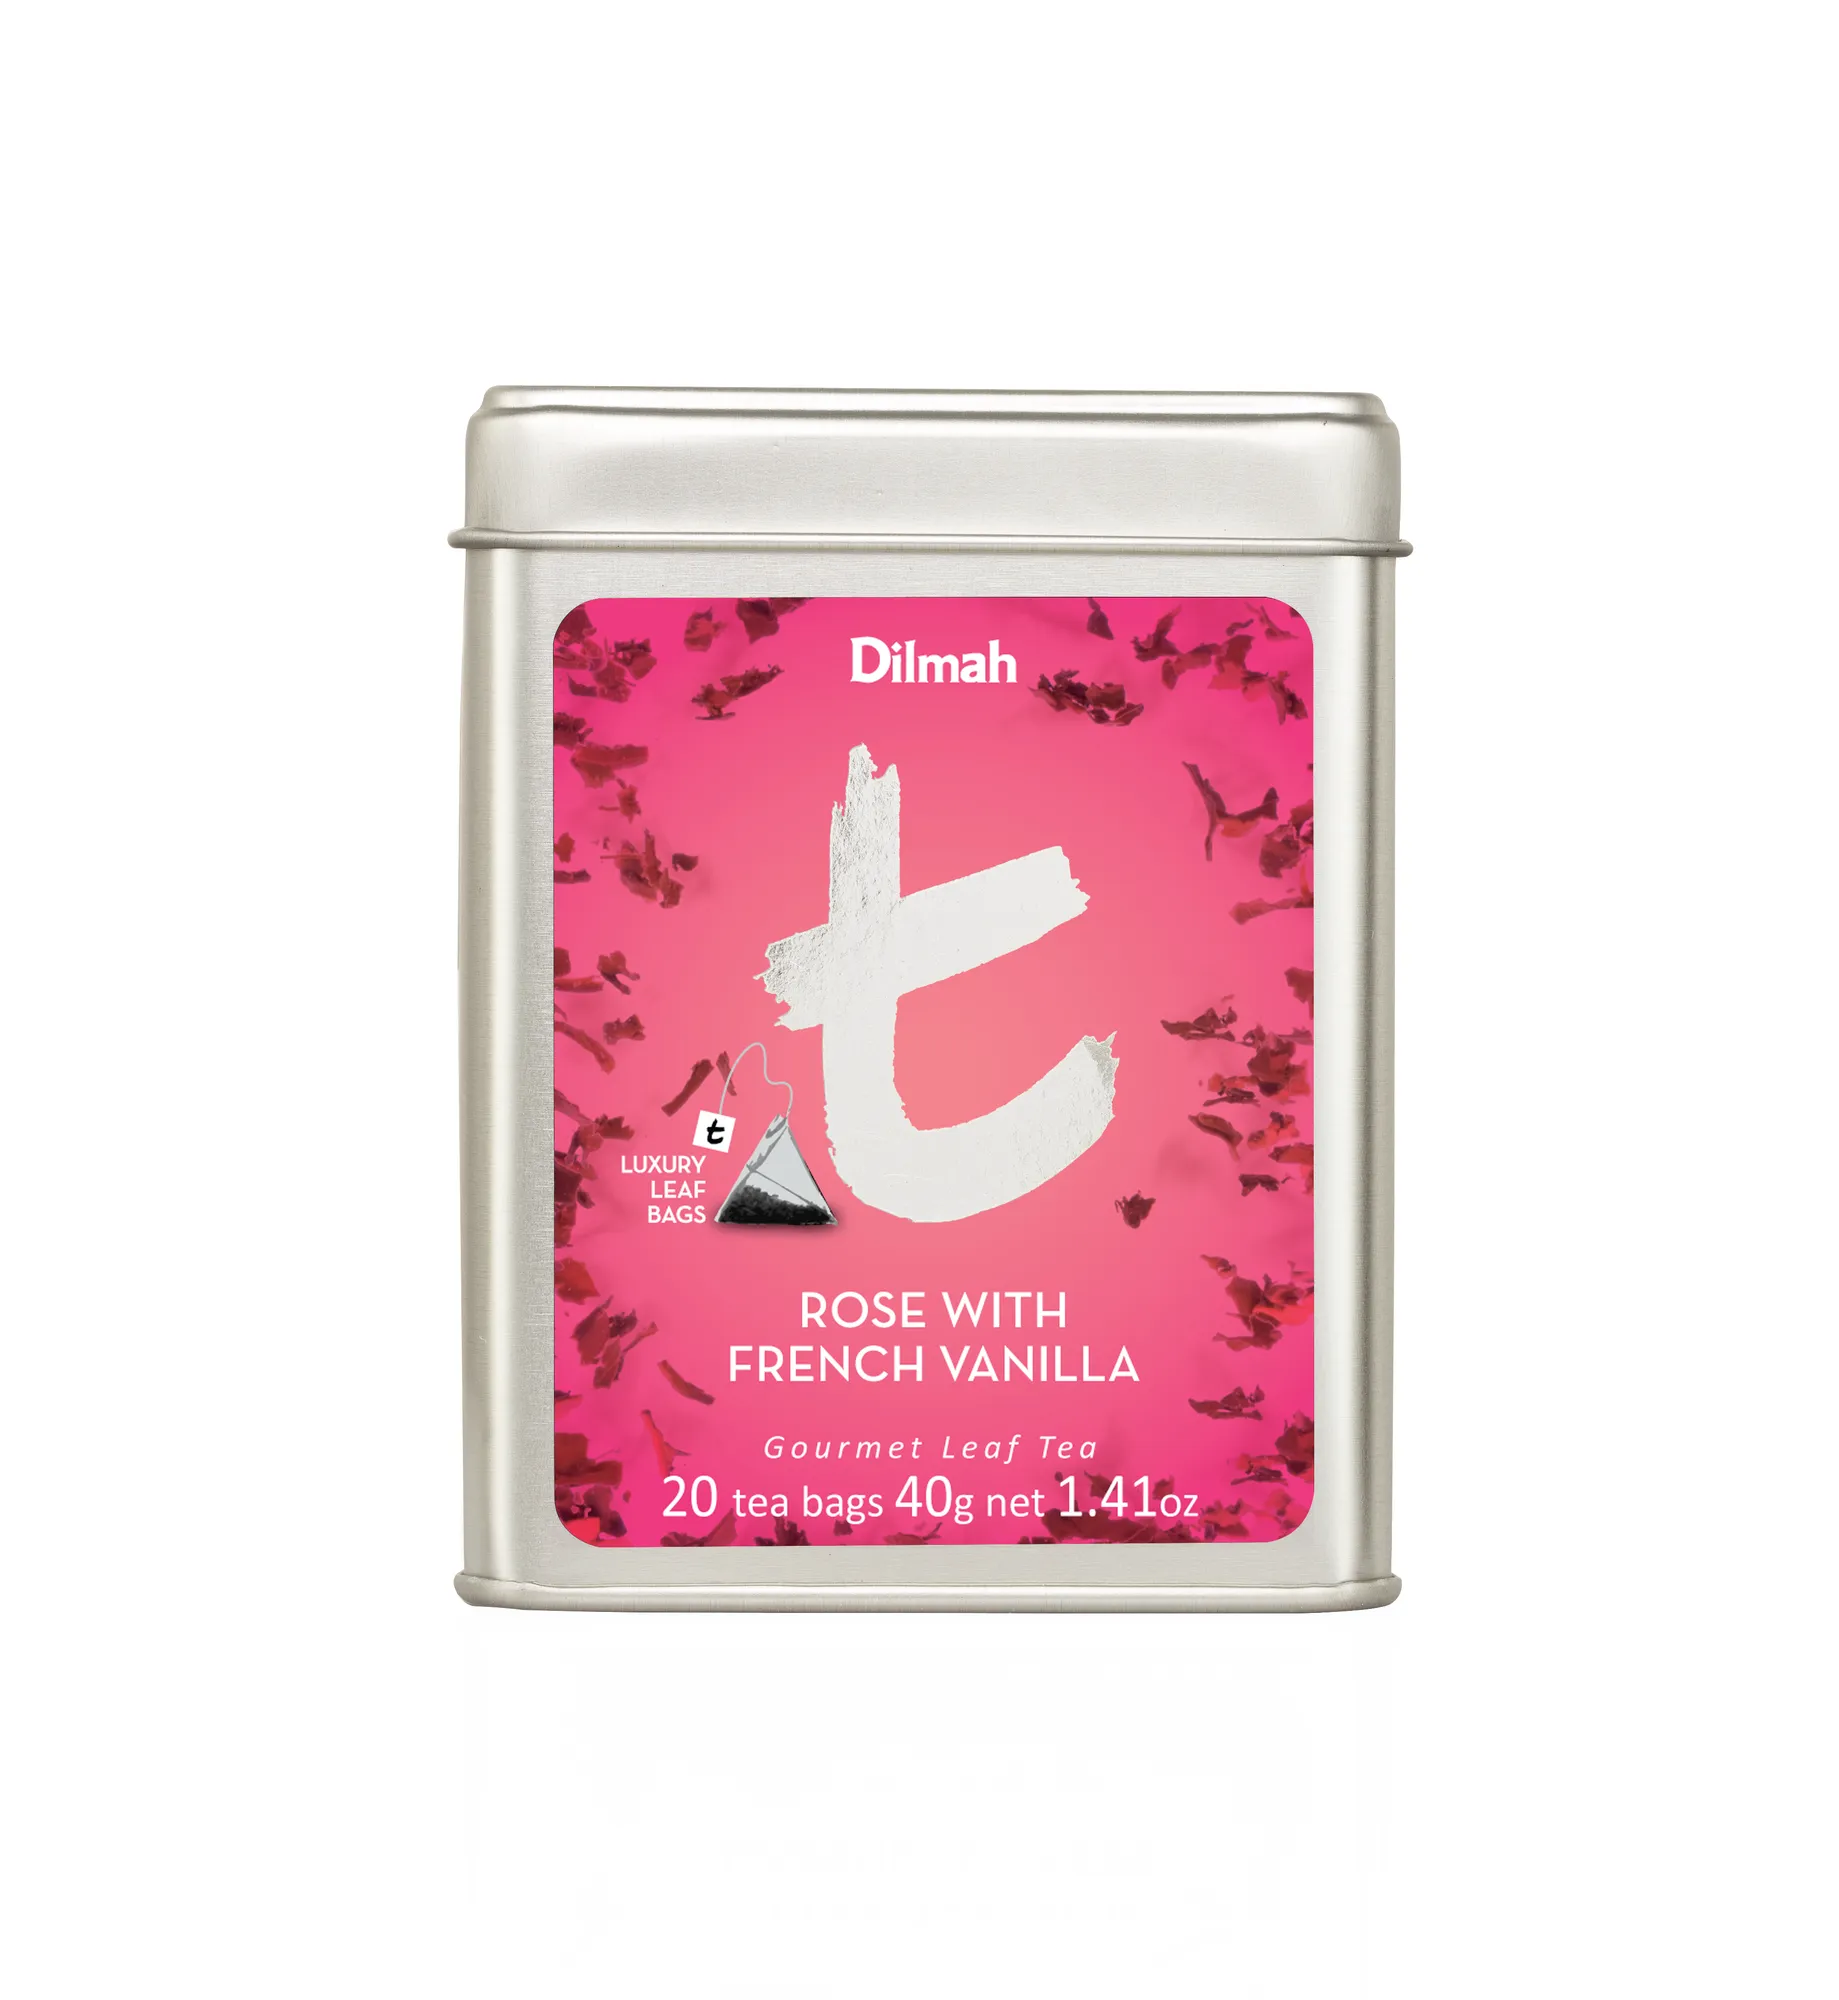 20 tea bags of Rose with French vanilla black tea in tin